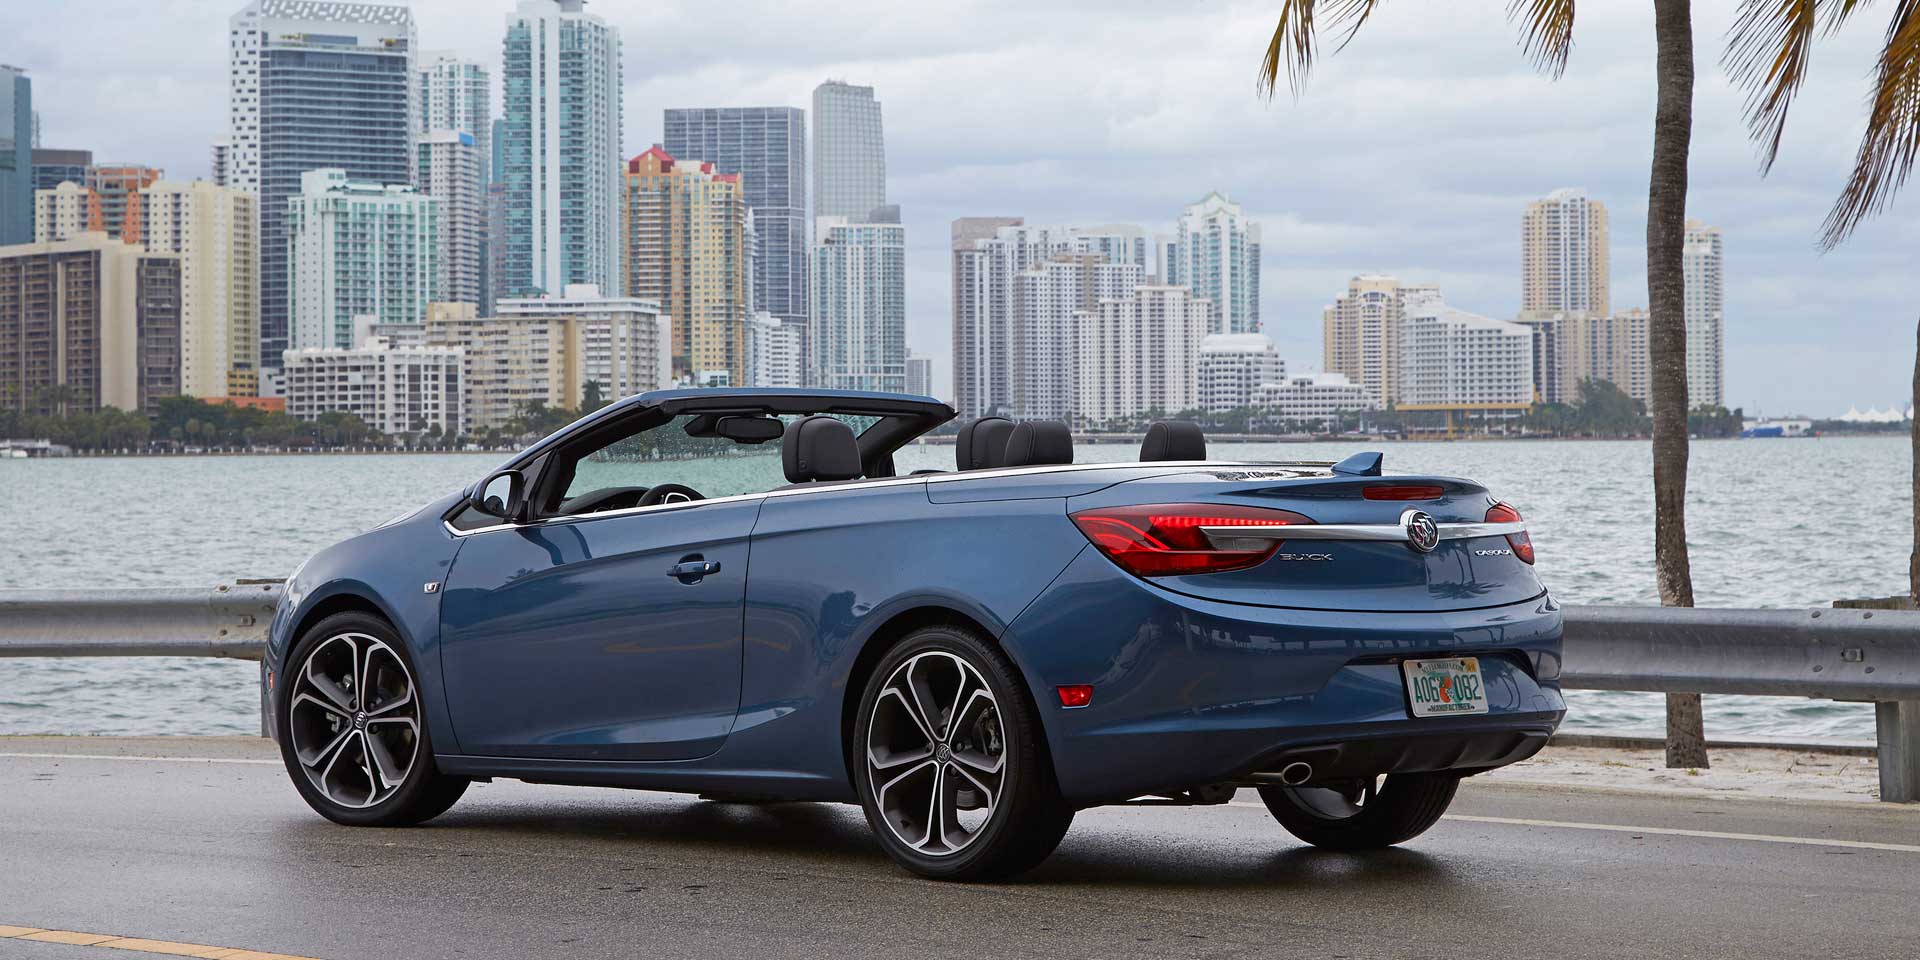 2019  buick  cascada  vehicles on display  chicago